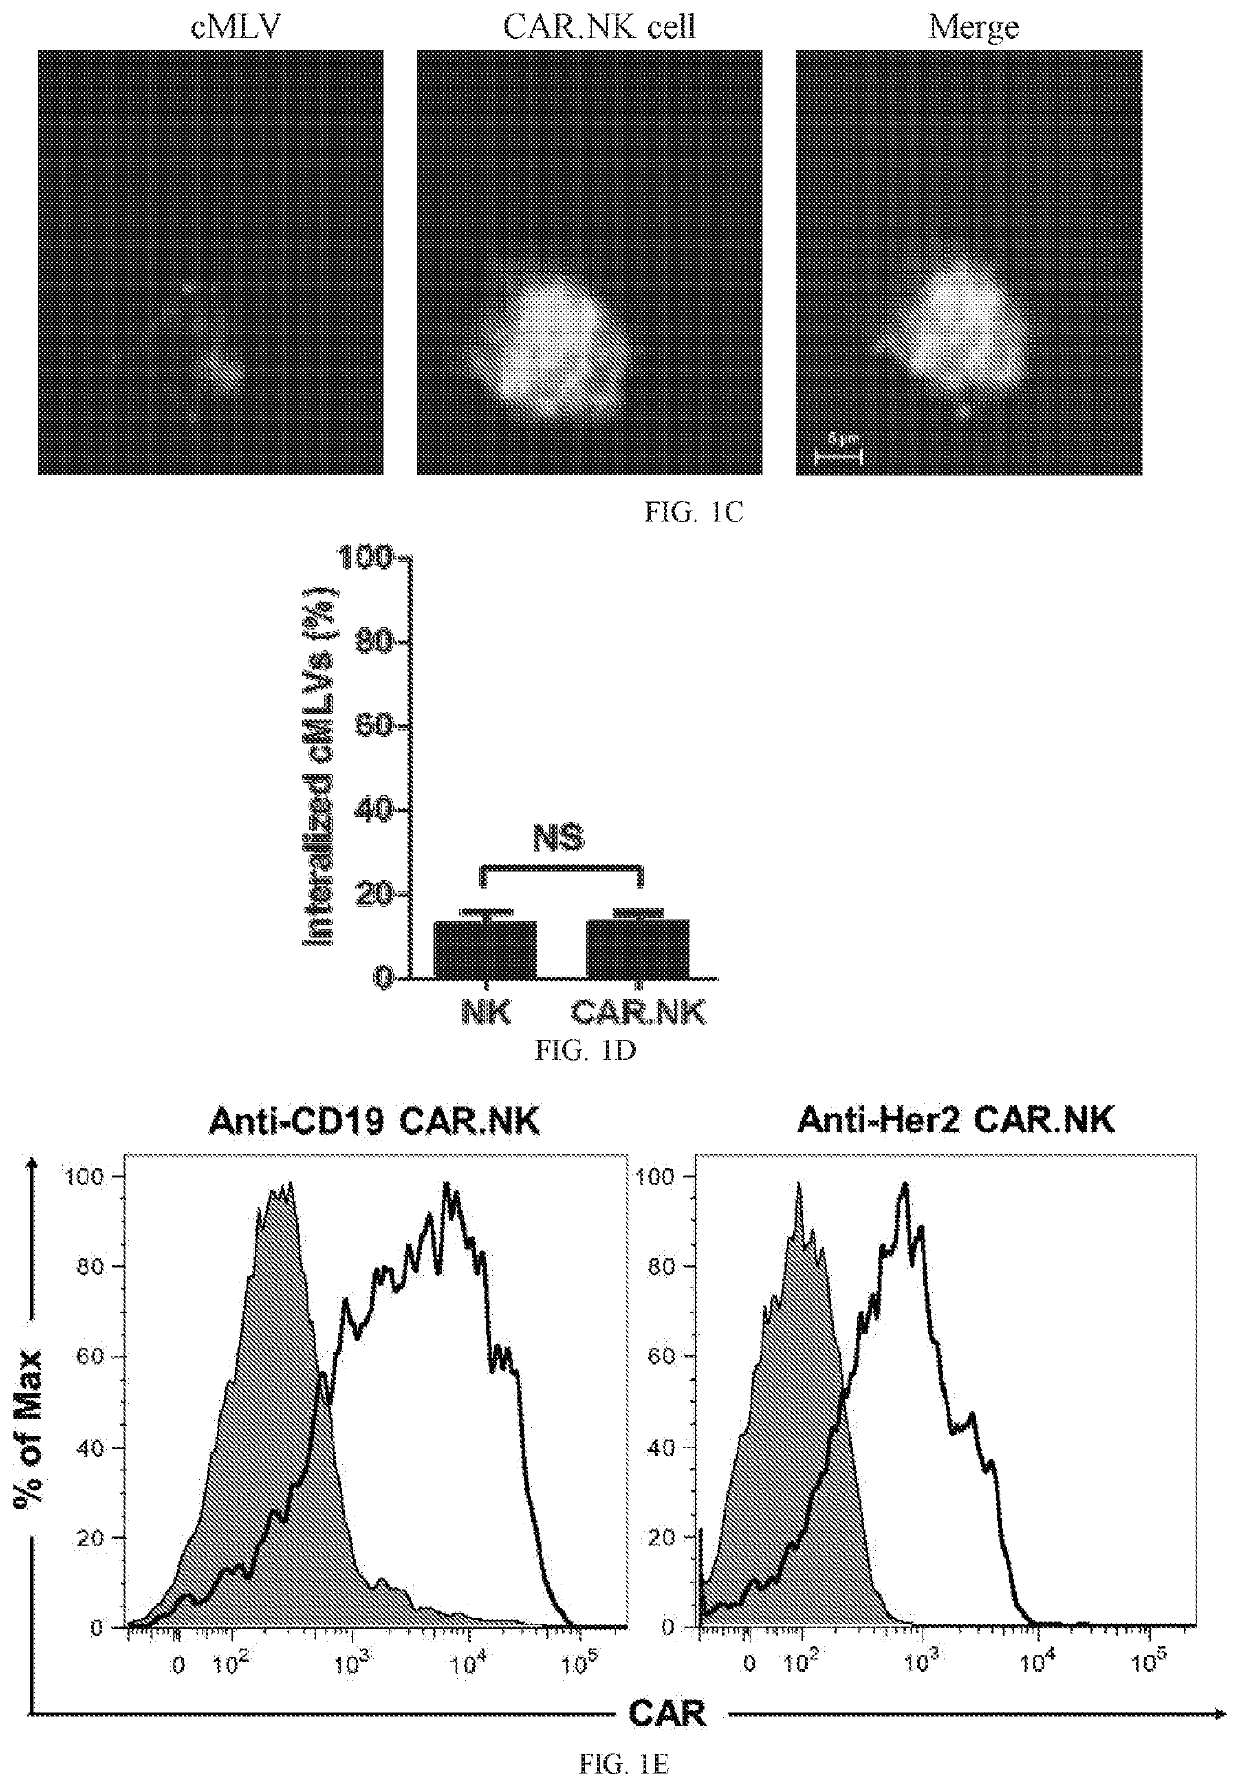 Combination cancer therapy using chimeric antigen receptor engineered natural killer cells as chemotherapeutic drug carriers